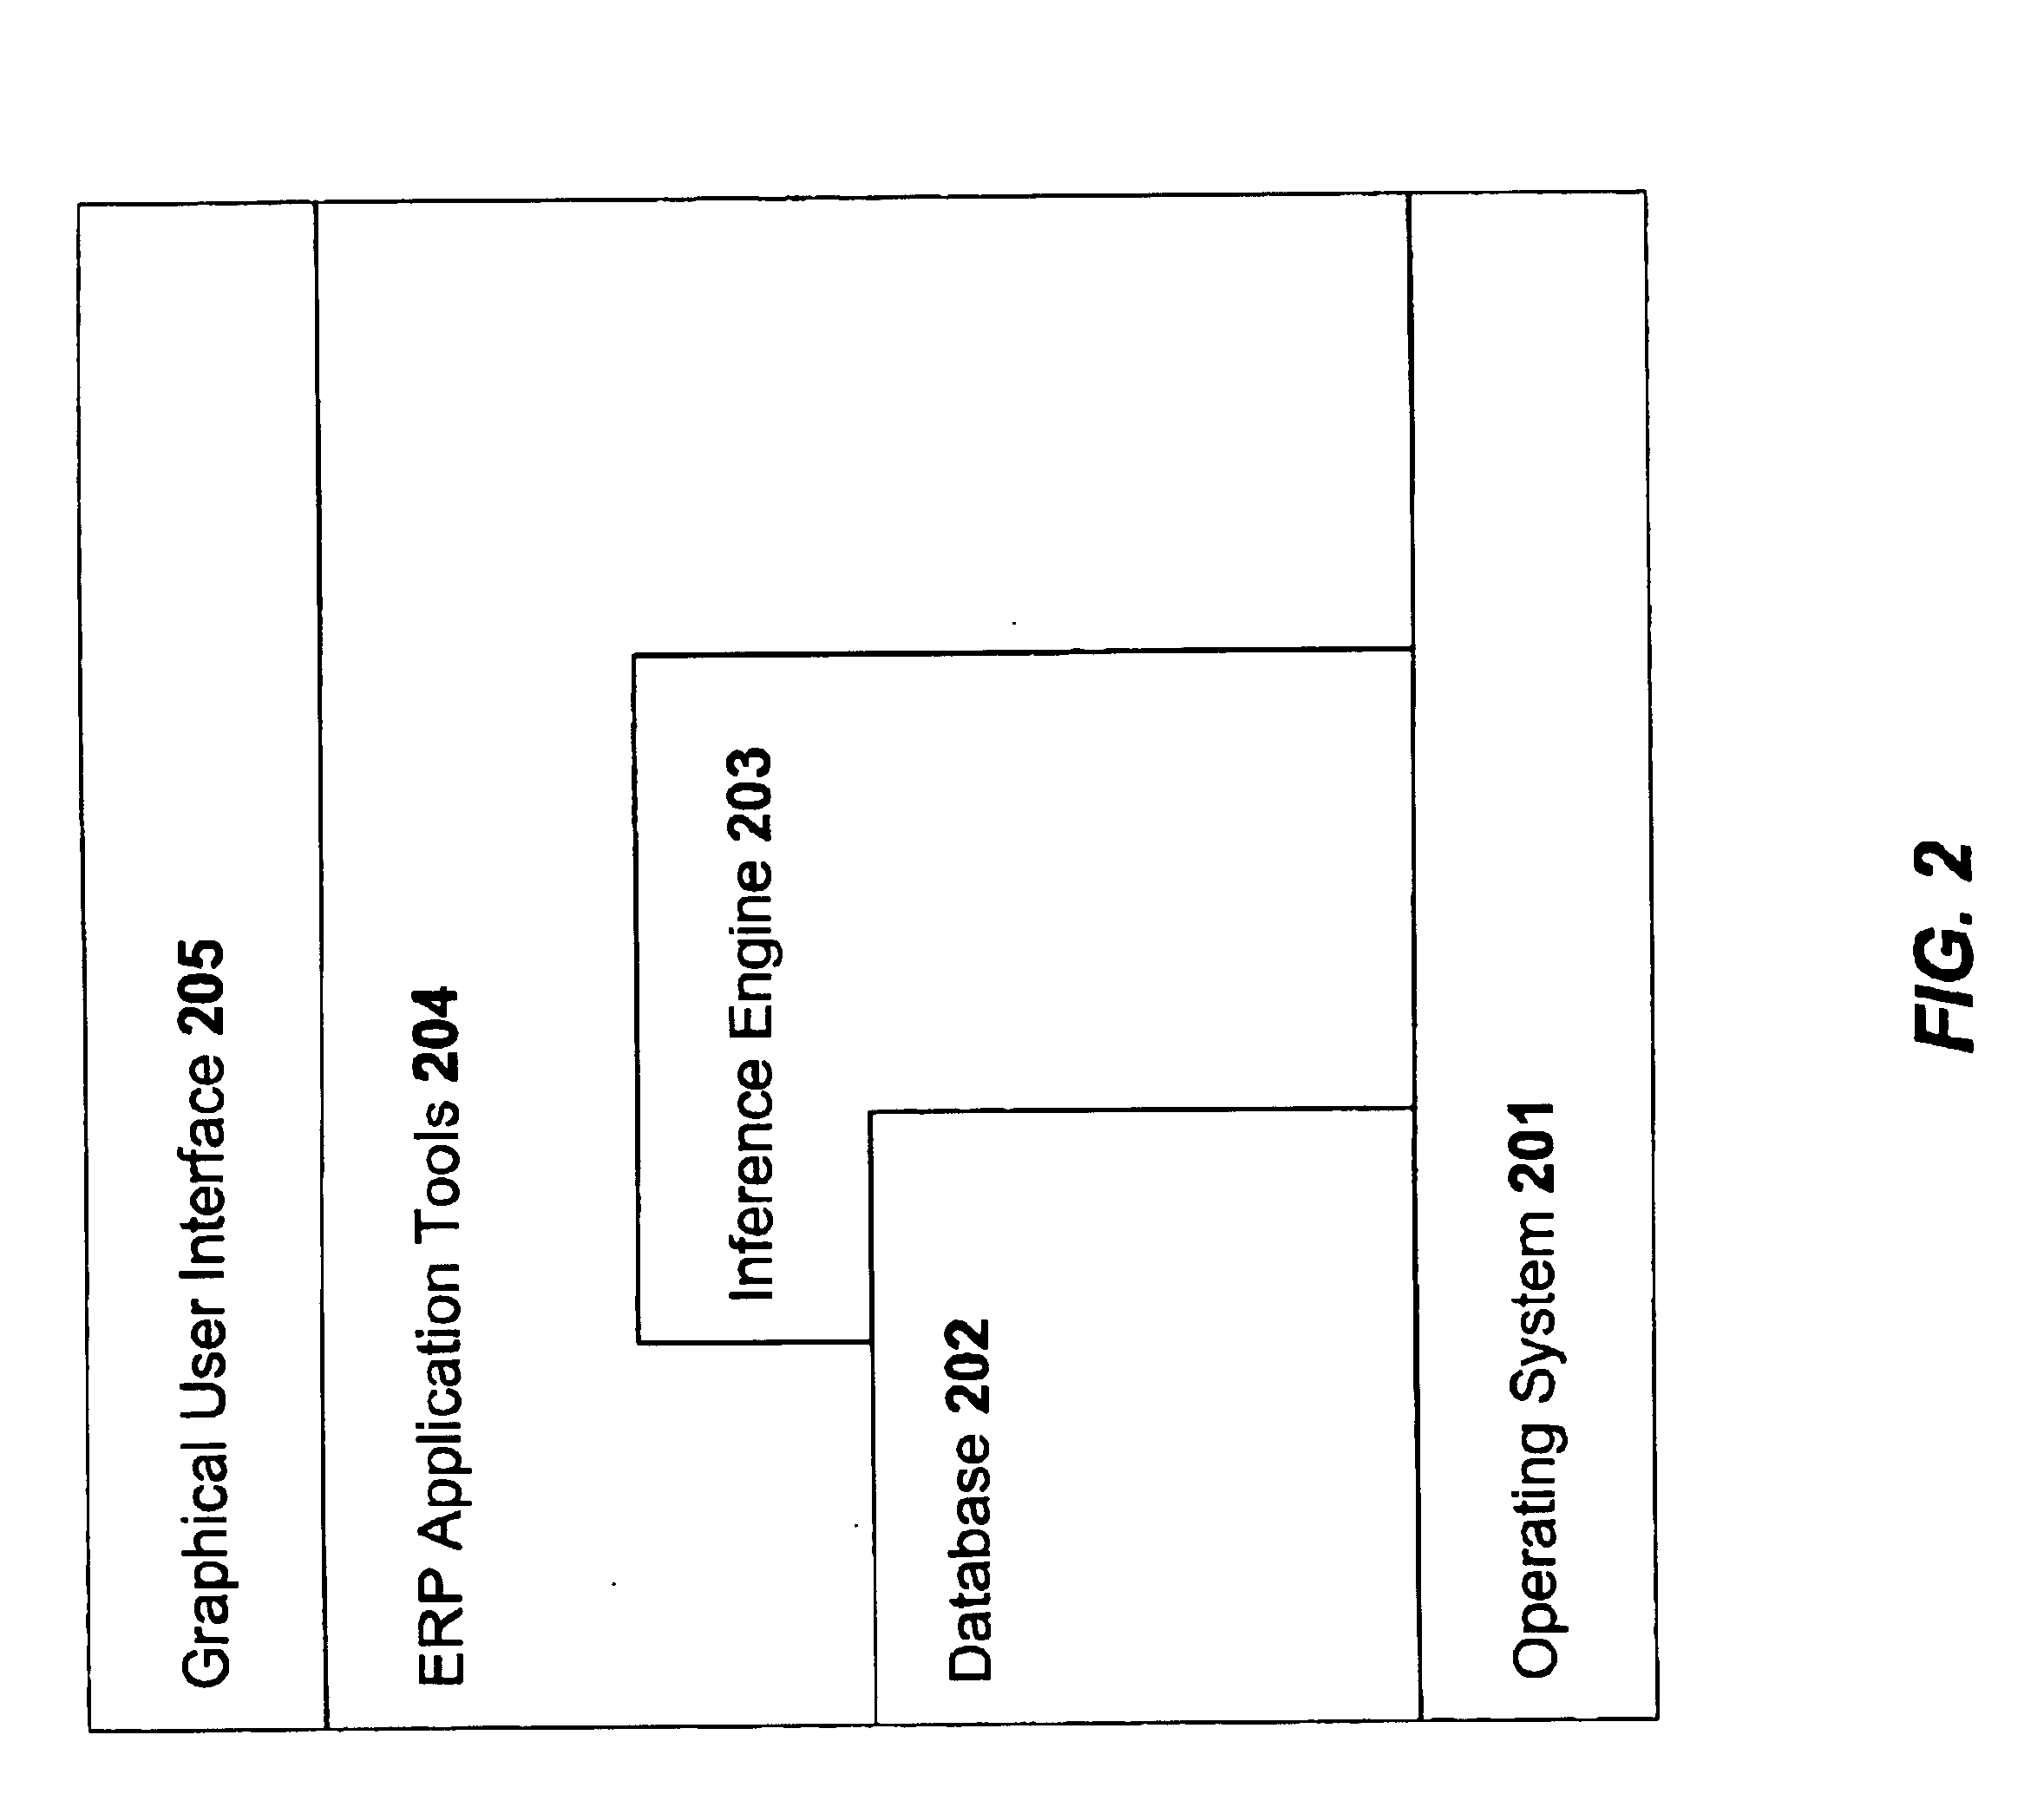 Method and system for dynamic business process management using a partial order planner